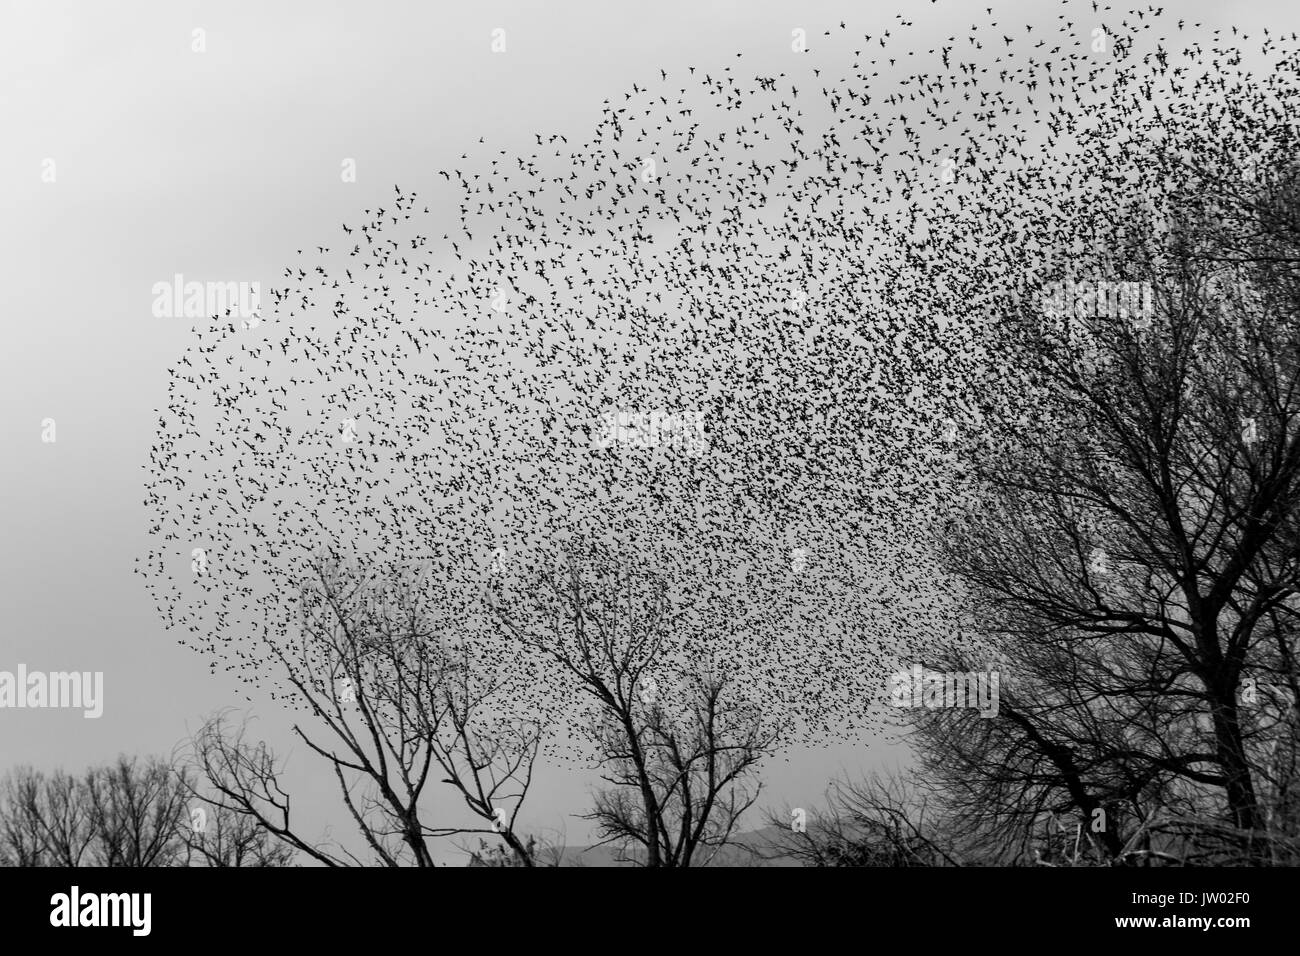 A flock of countless birds flying away from some trees Stock Photo